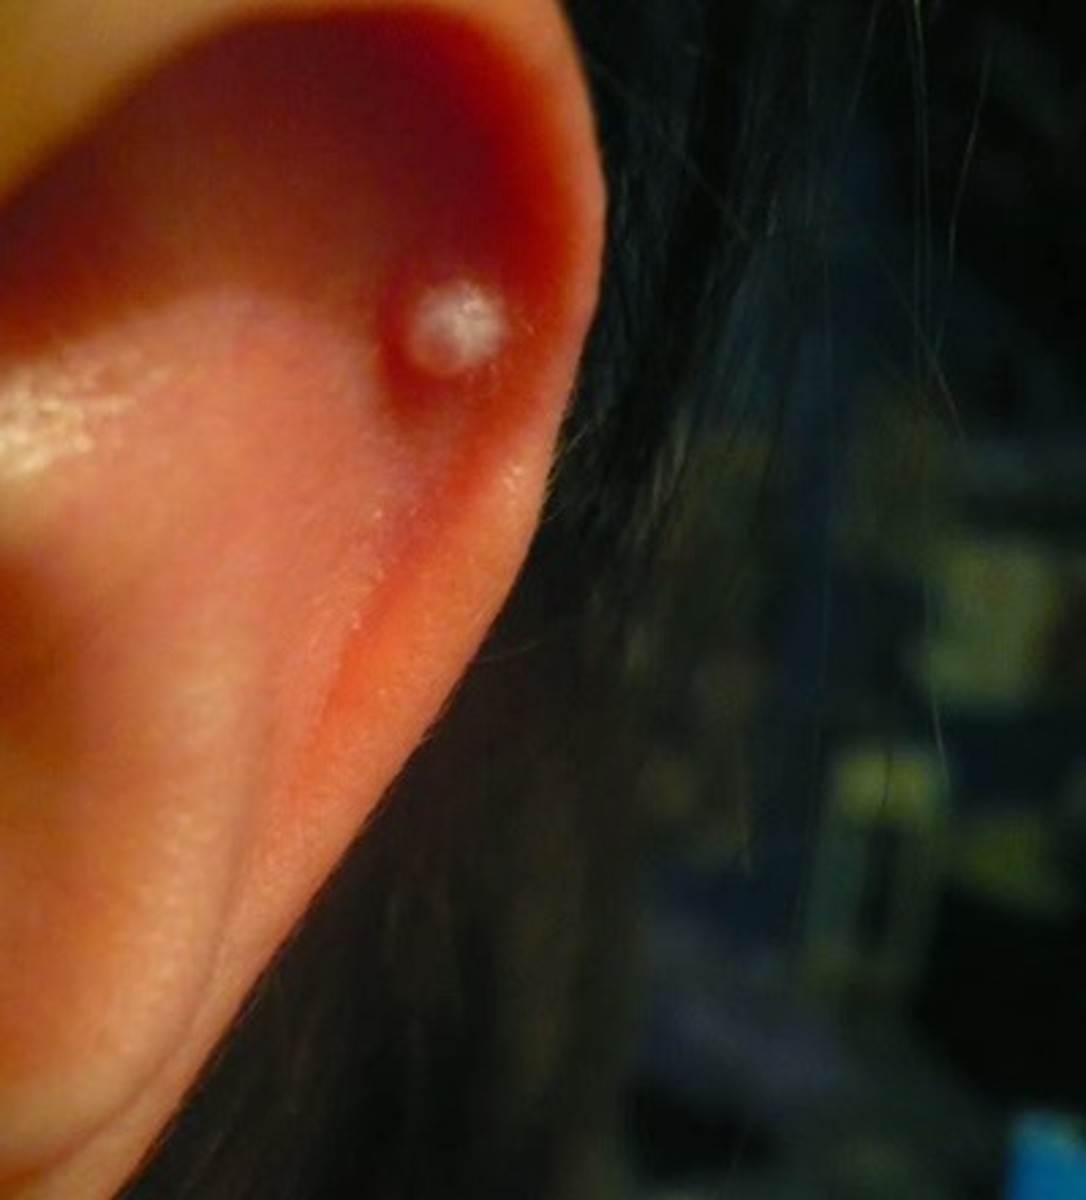 Causes, Treatment, and Pictures of Pimples in the Ear -